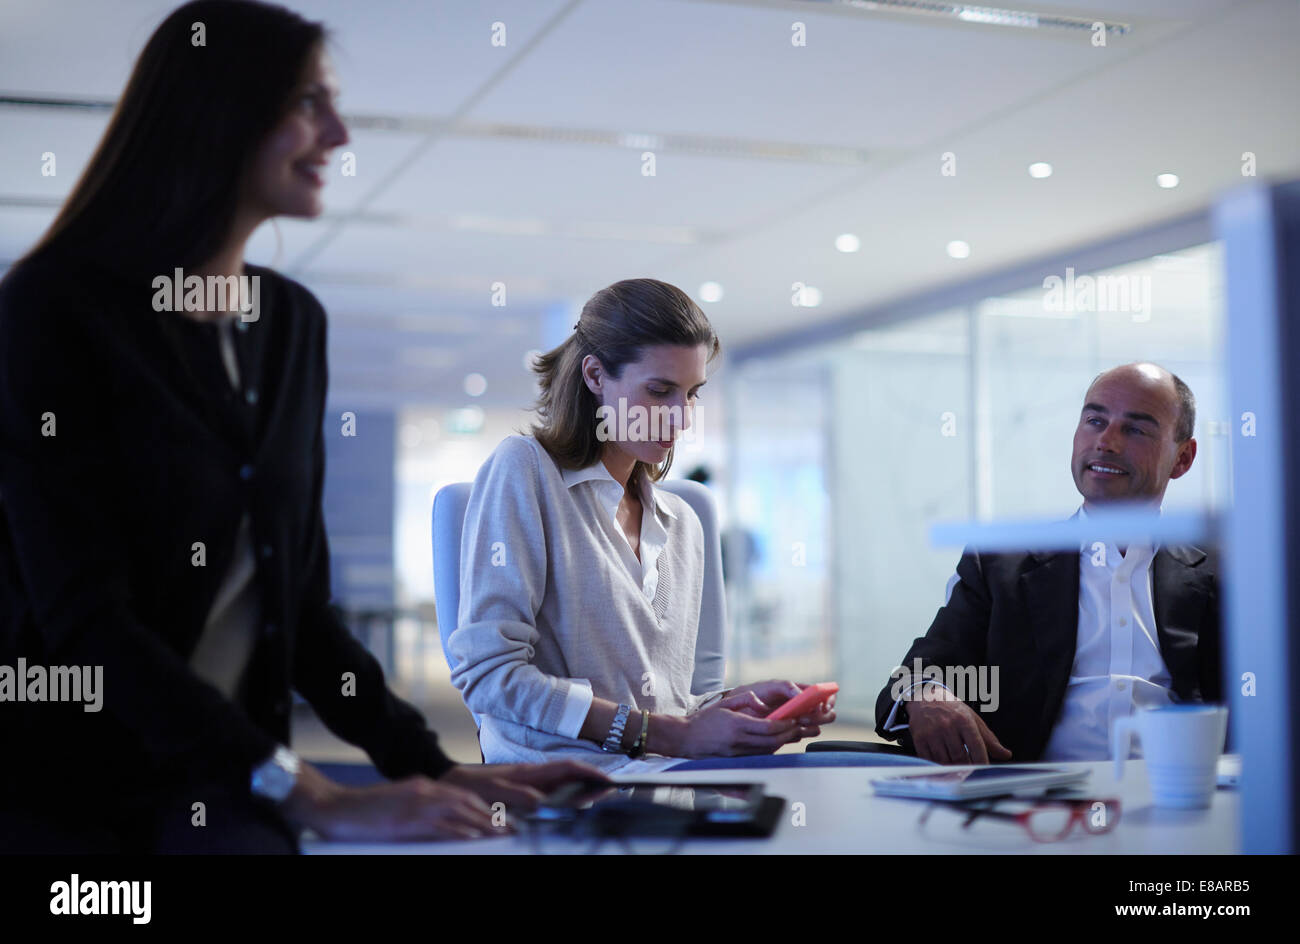 Business colleagues chatting over desk in office Stock Photo